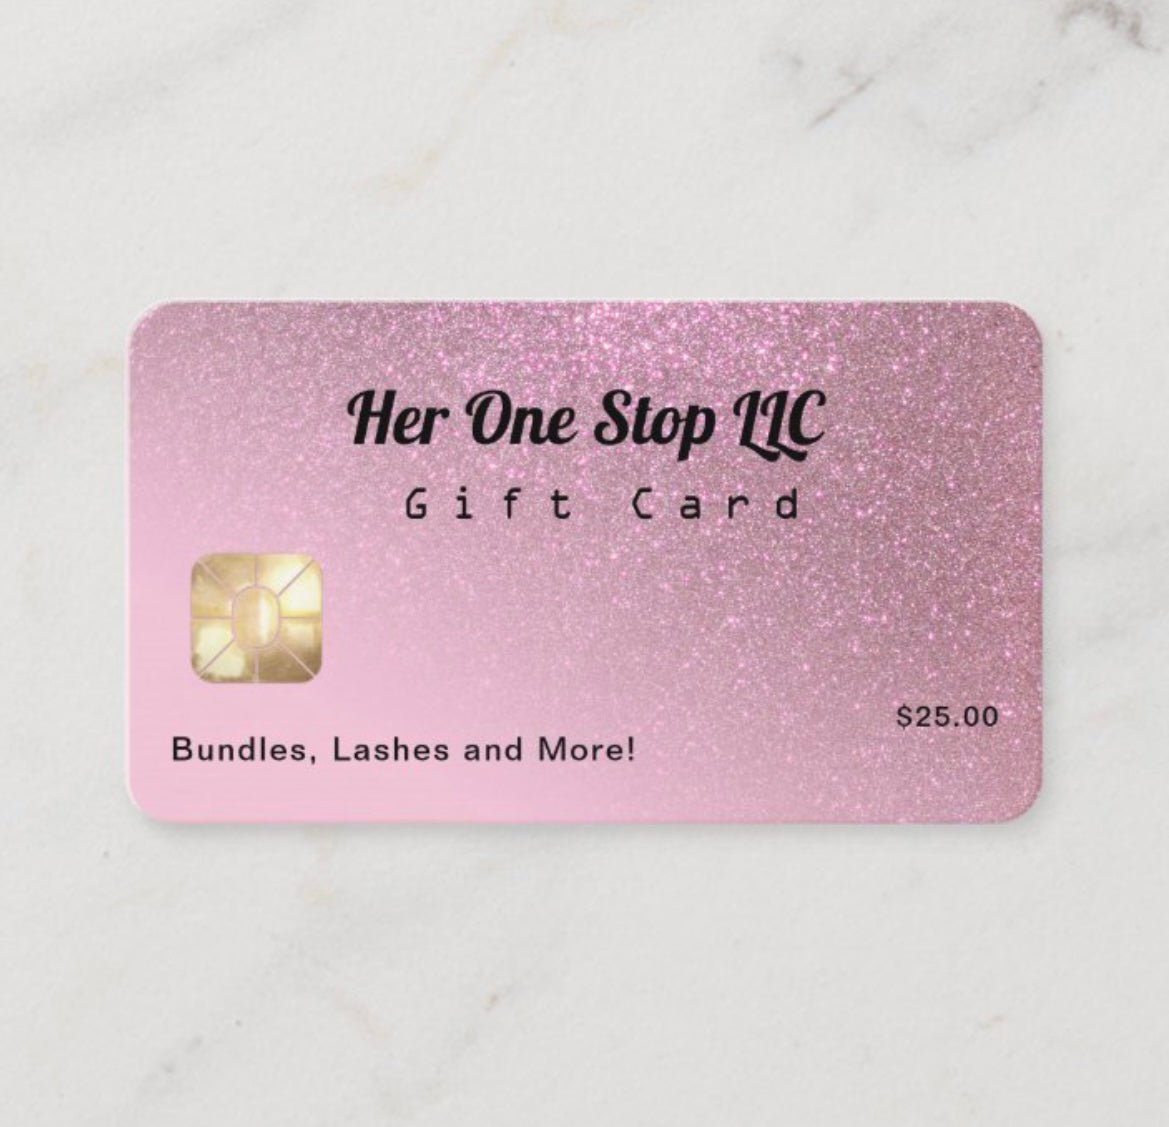 Gift Cards - Her One Stop LLC 